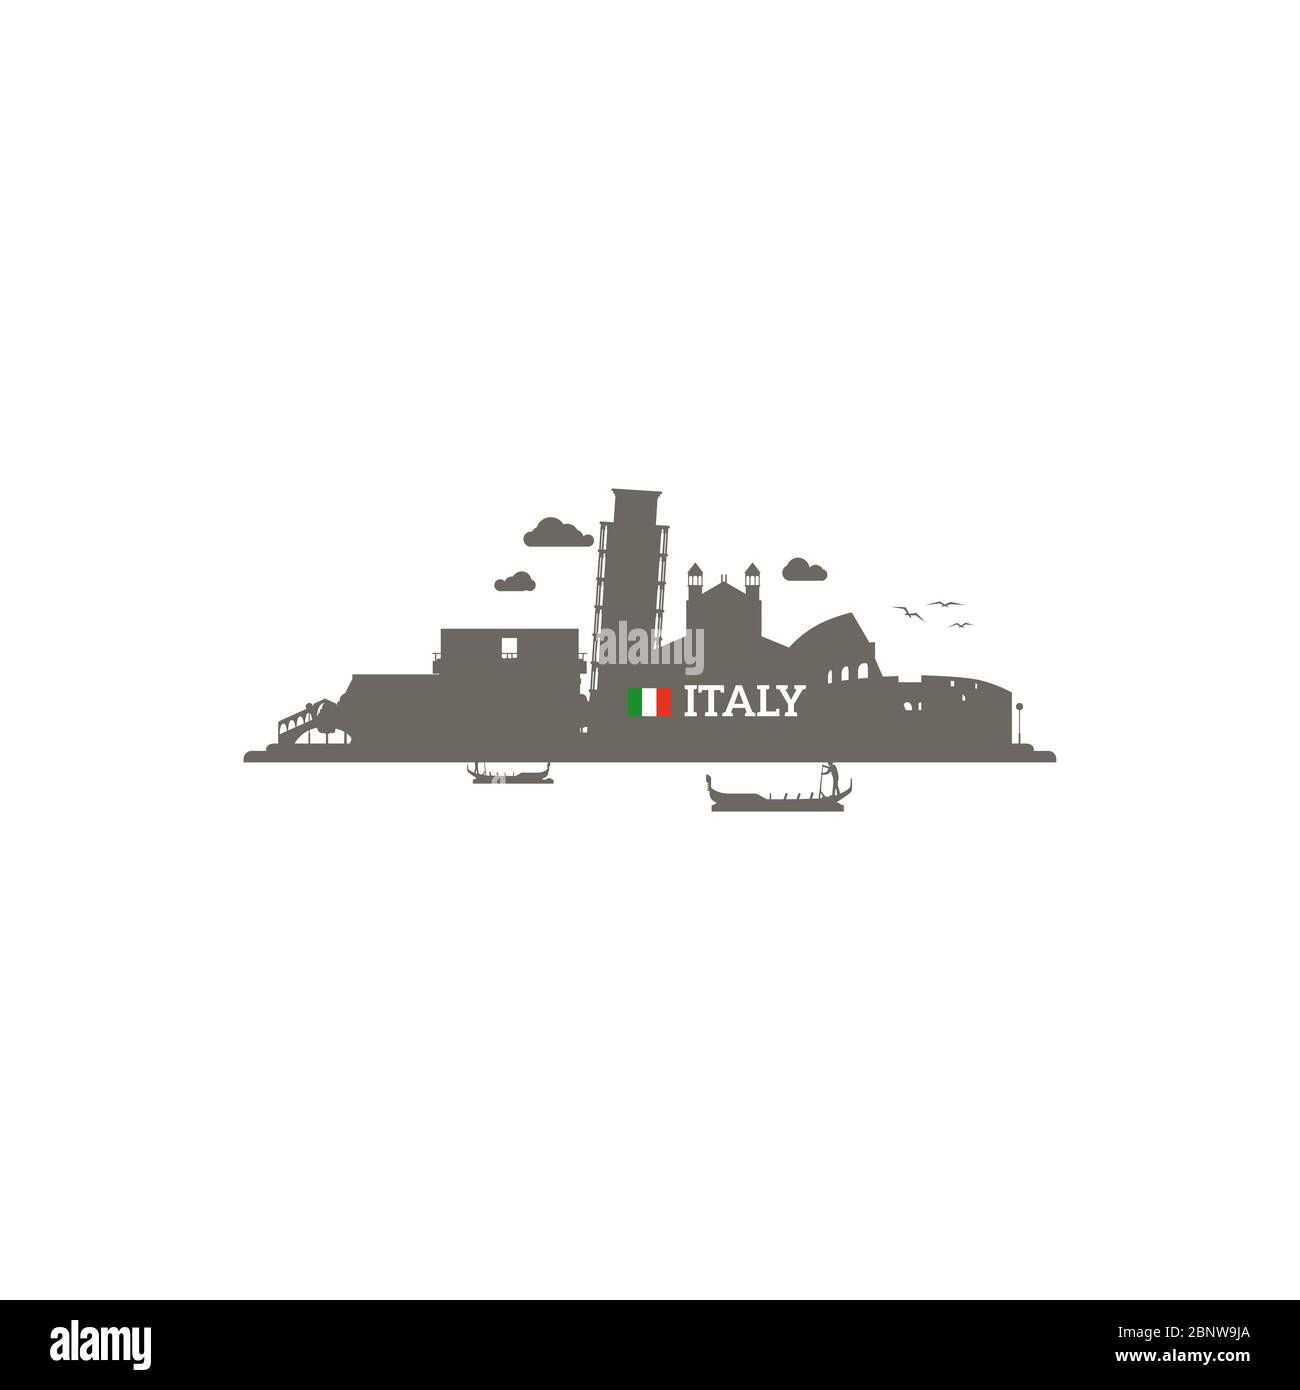 Italy skyline silhouette with name of country and flag. Vector illustration Stock Vector